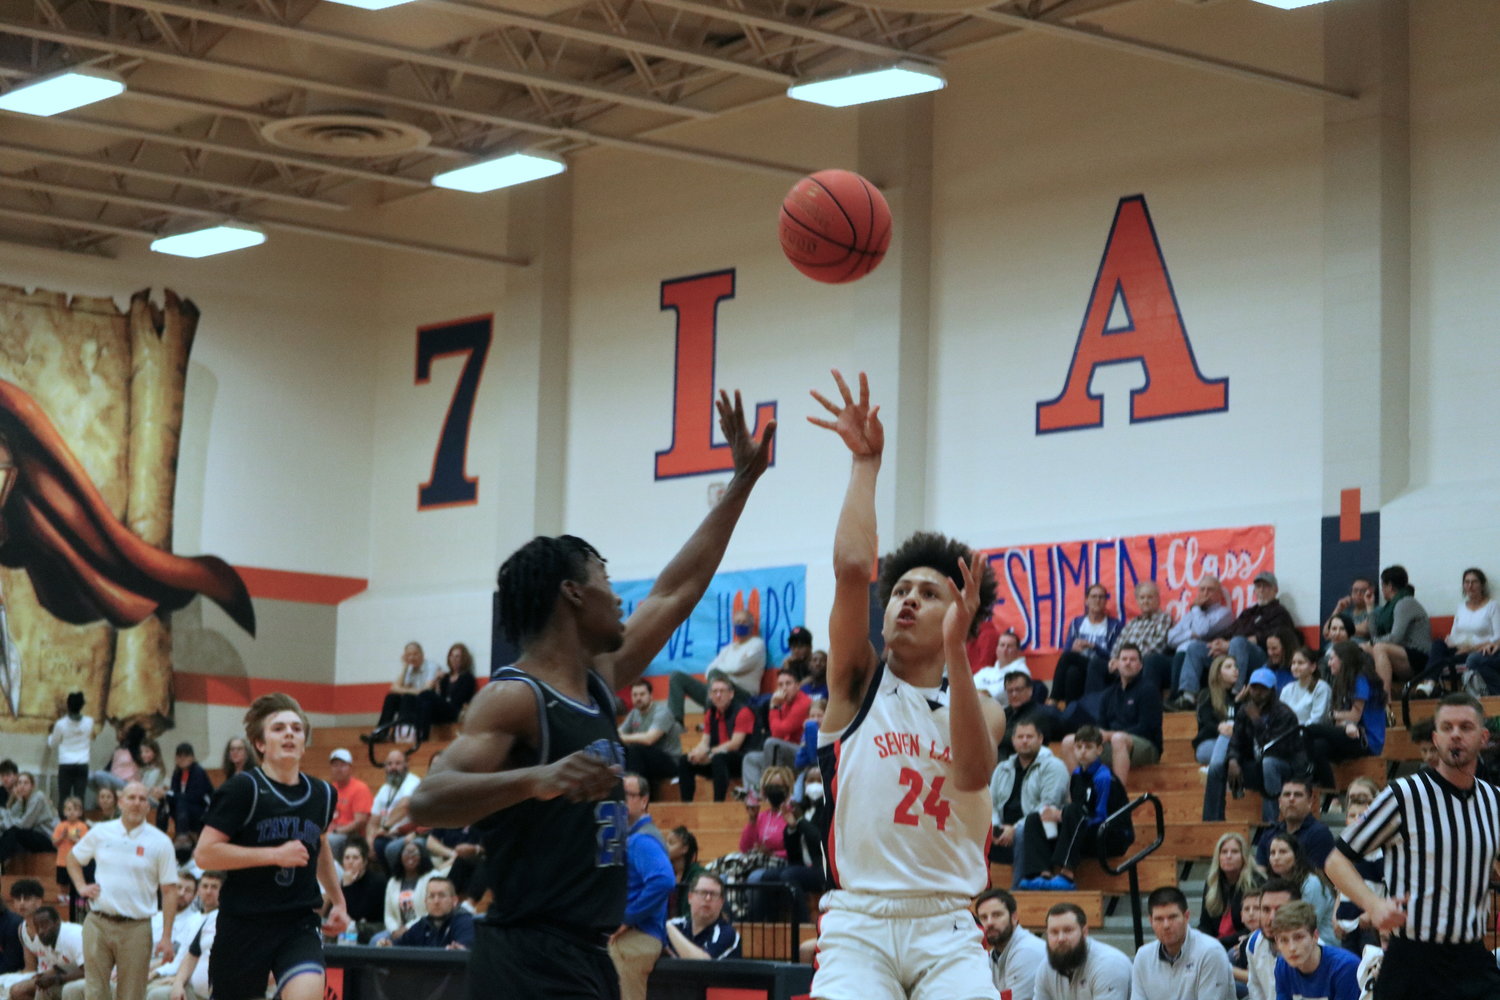 AJ Bates throws a lob pass during Wednesday’s game between Seven Lakes and Taylor at the Seven Lakes gym.